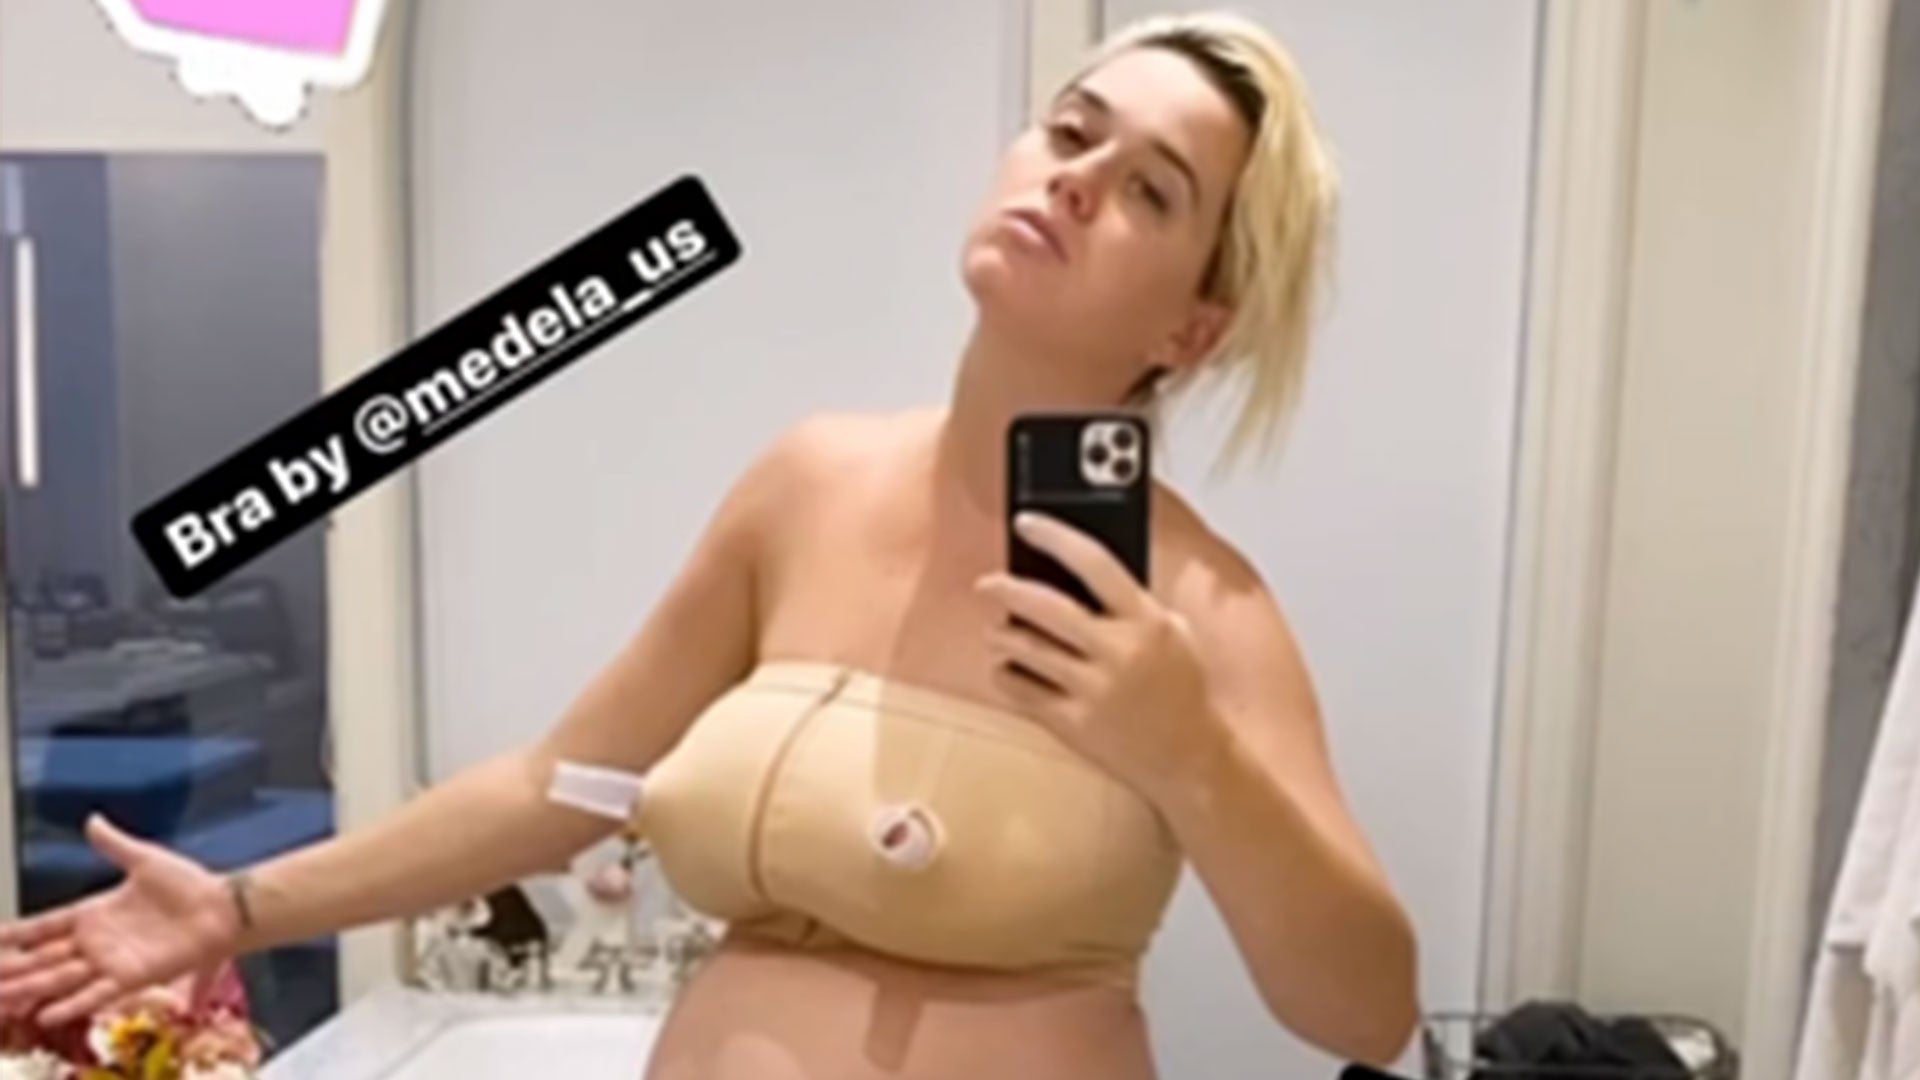 destiny boling recommends katy perry boobies pic